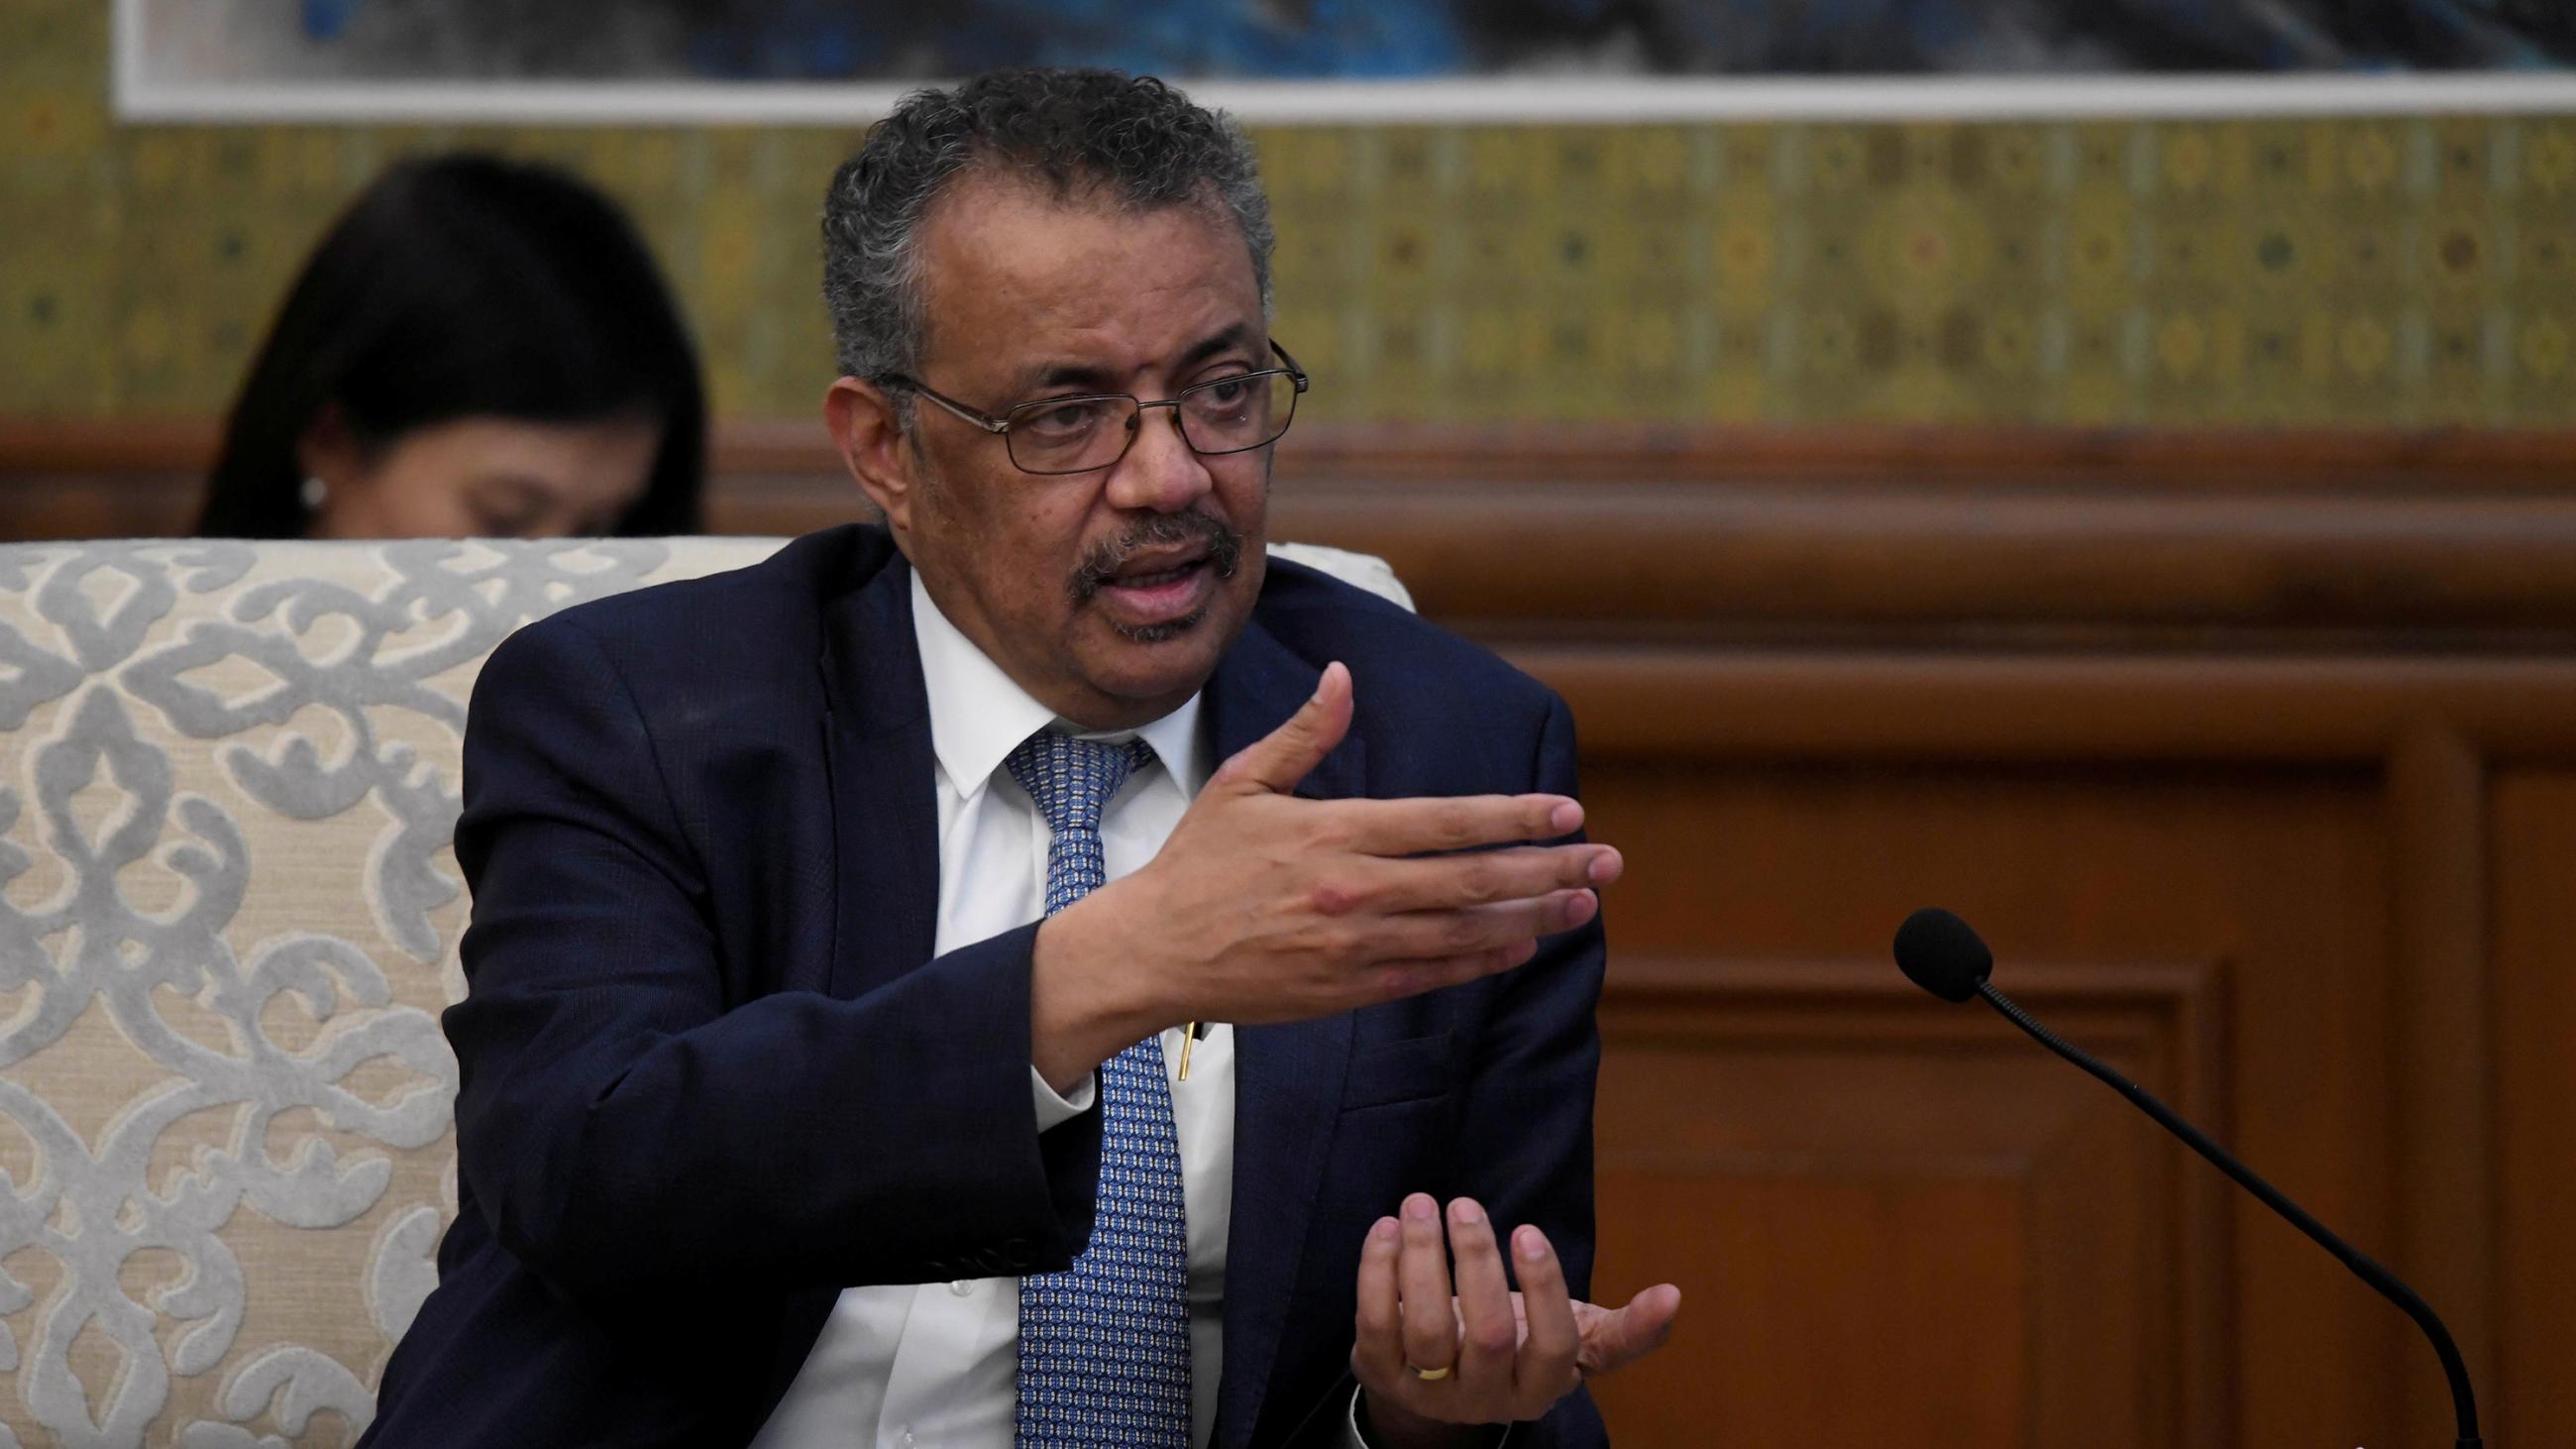 The photo shows Director-General Tedros talking and guesturing with his hands. 